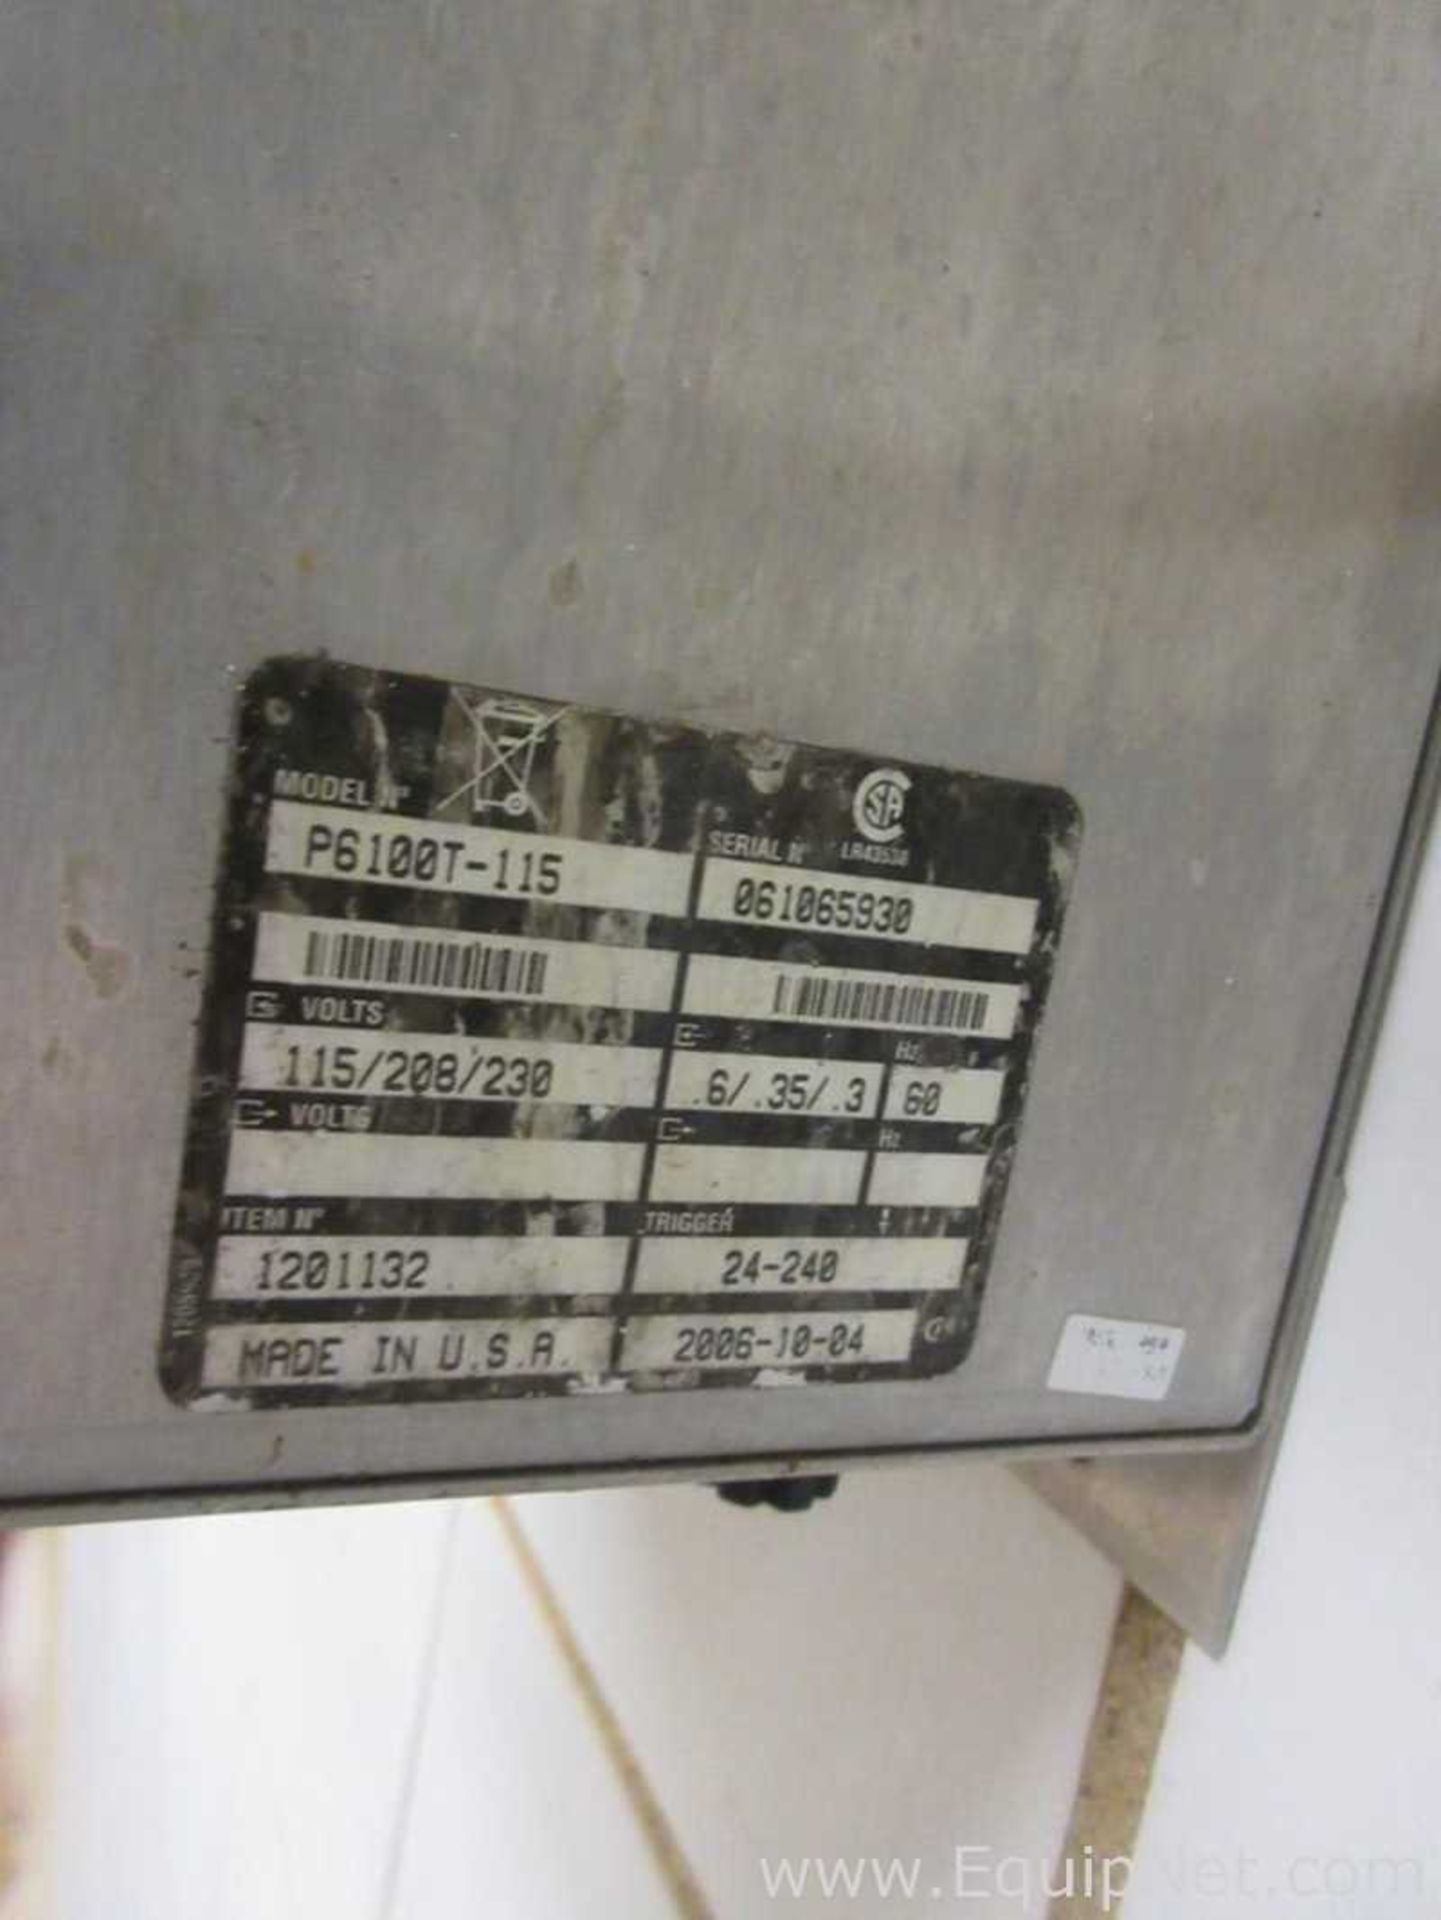 EQUIPNET LISTING #775980; REMOVAL COST: $15,754.00; DESCRIPTION: CIP System With Three Tanks, - Image 16 of 17